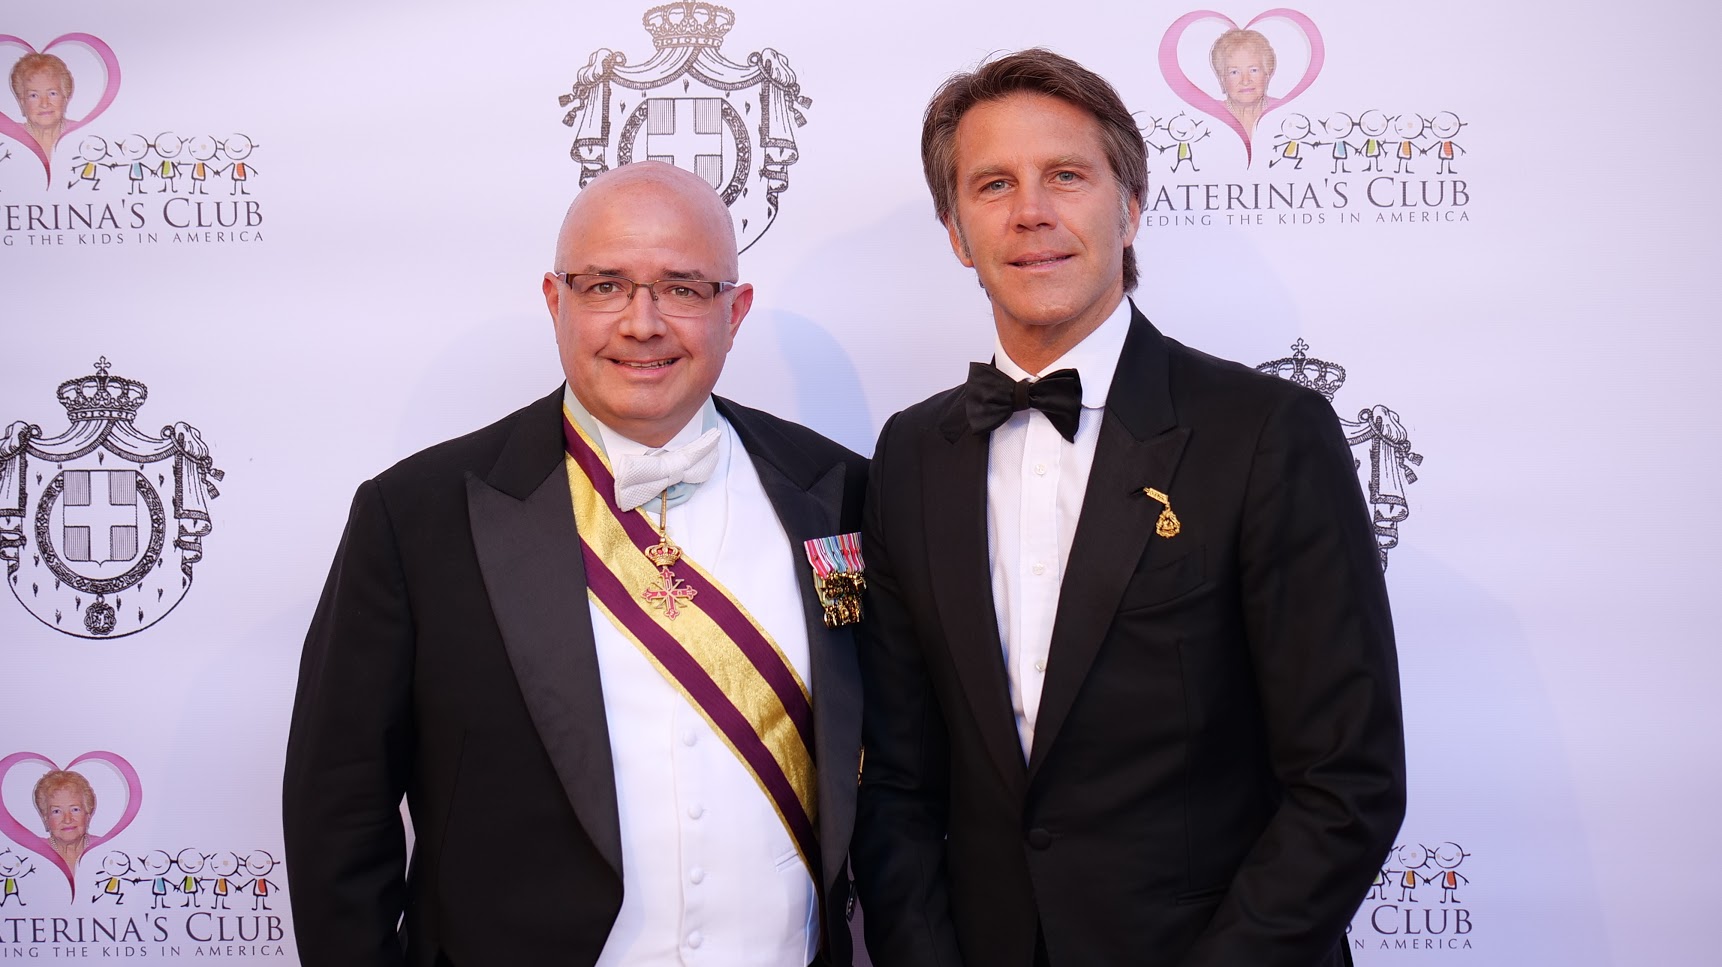 Robert P. Ruffolo, Lt. Col. (Ret), Regional Representative of the Savoy Orders in Chicago, with HRH Prince Emanuele Filiberto of Savoy